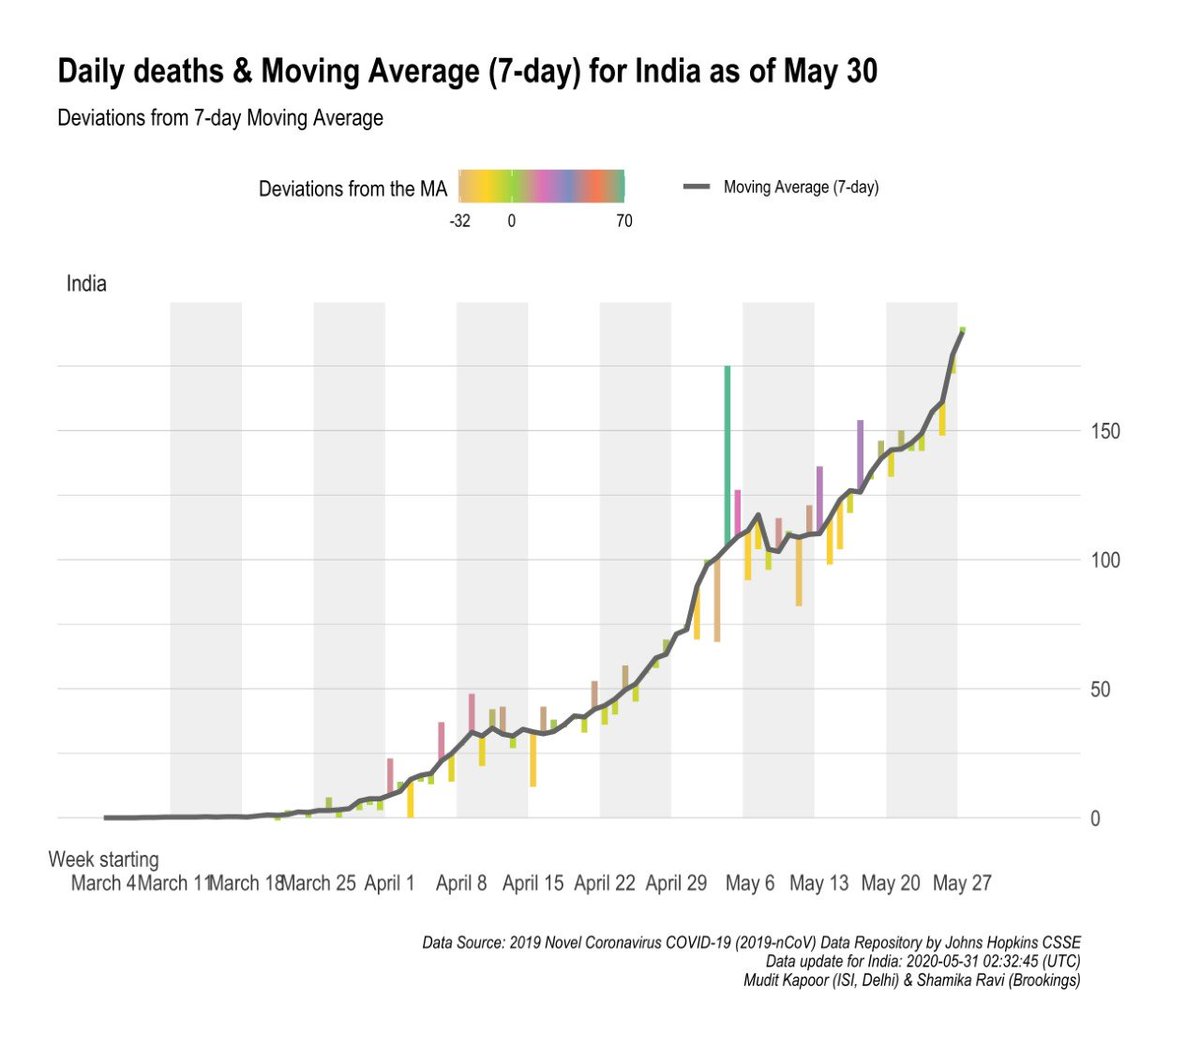 7 Day Moving Average and deviations:1) Daily cases2) Daily deaths